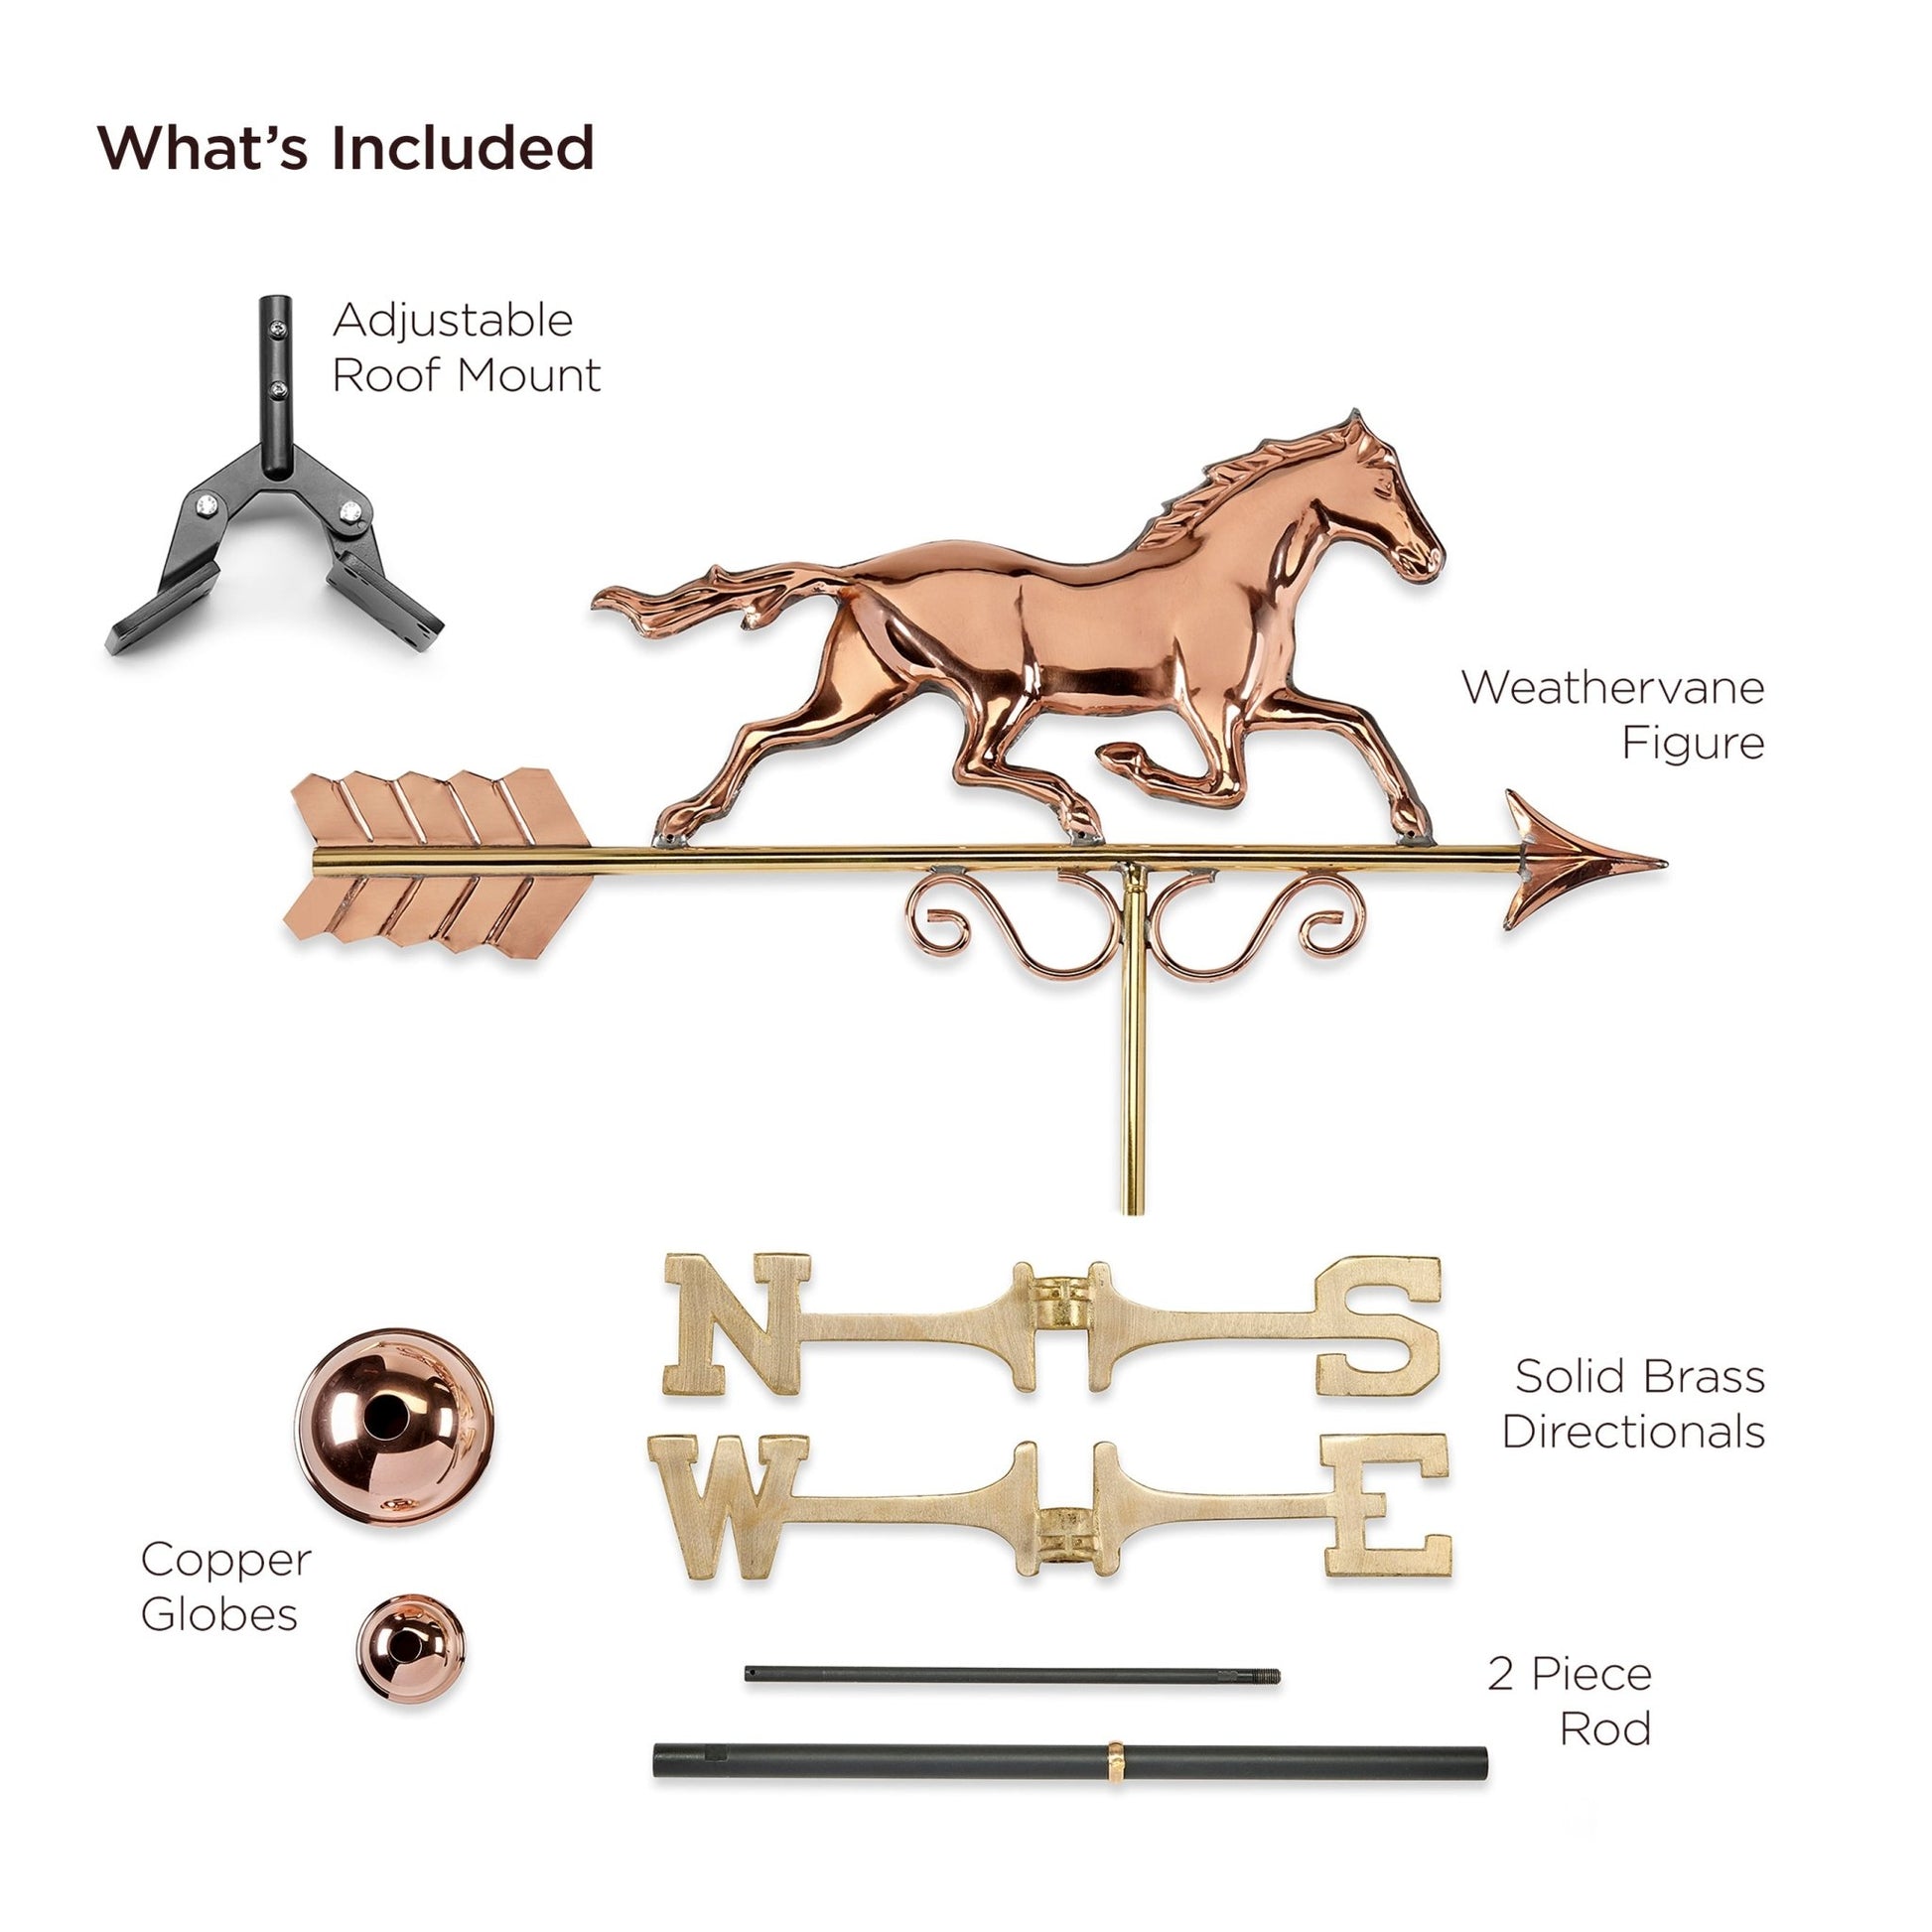 Galloping Horse Weathervane - Good Directions